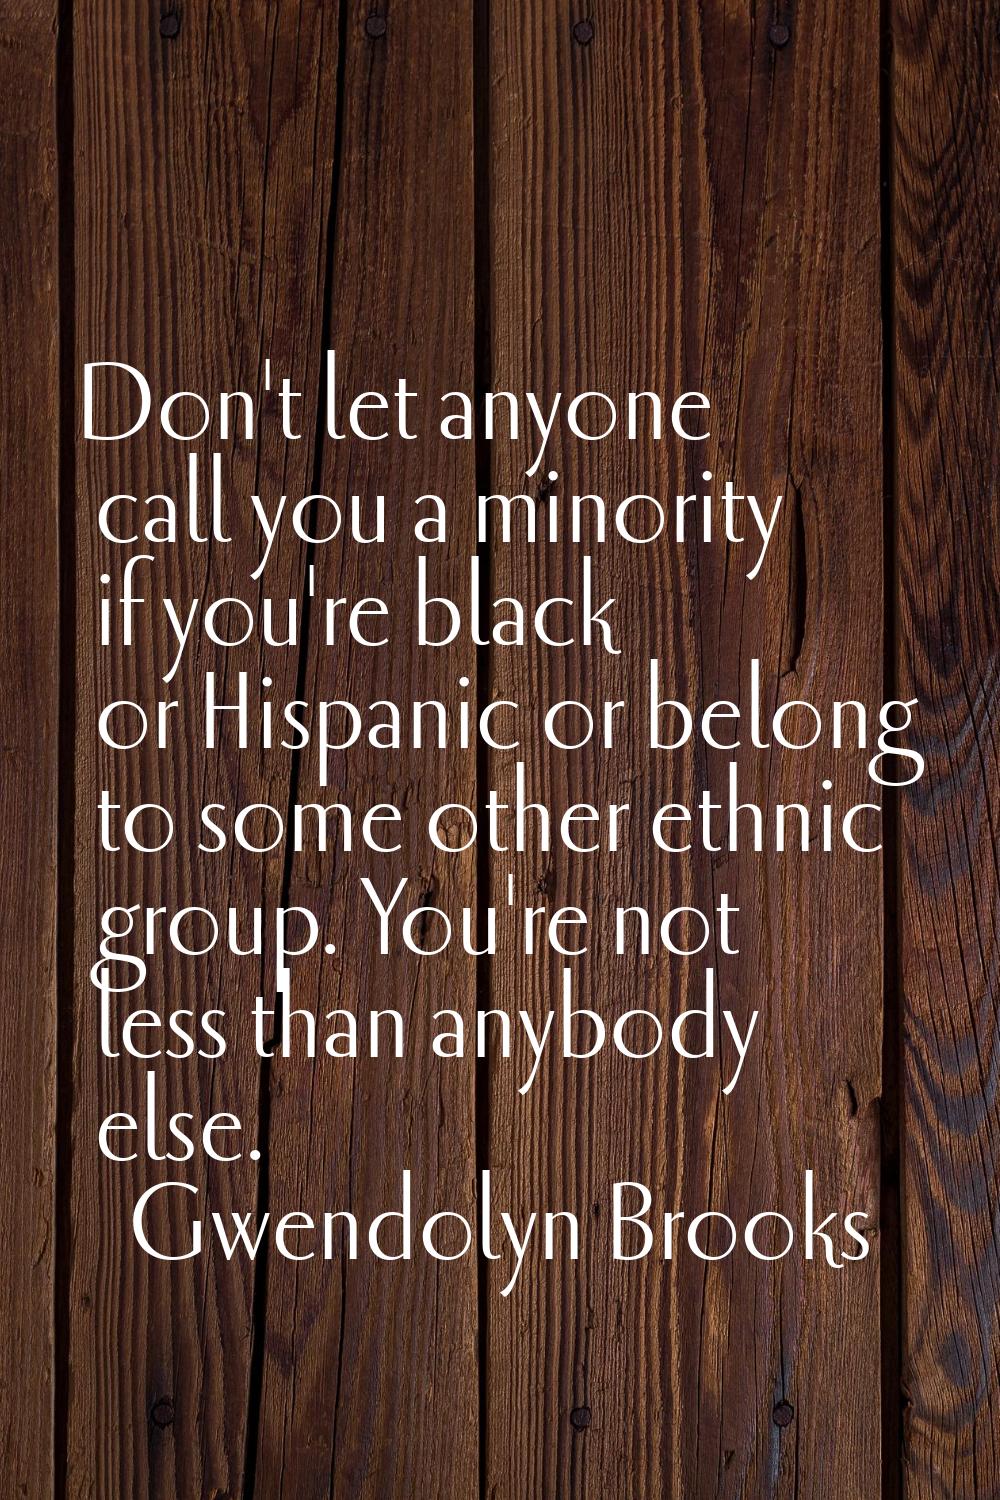 Don't let anyone call you a minority if you're black or Hispanic or belong to some other ethnic gro